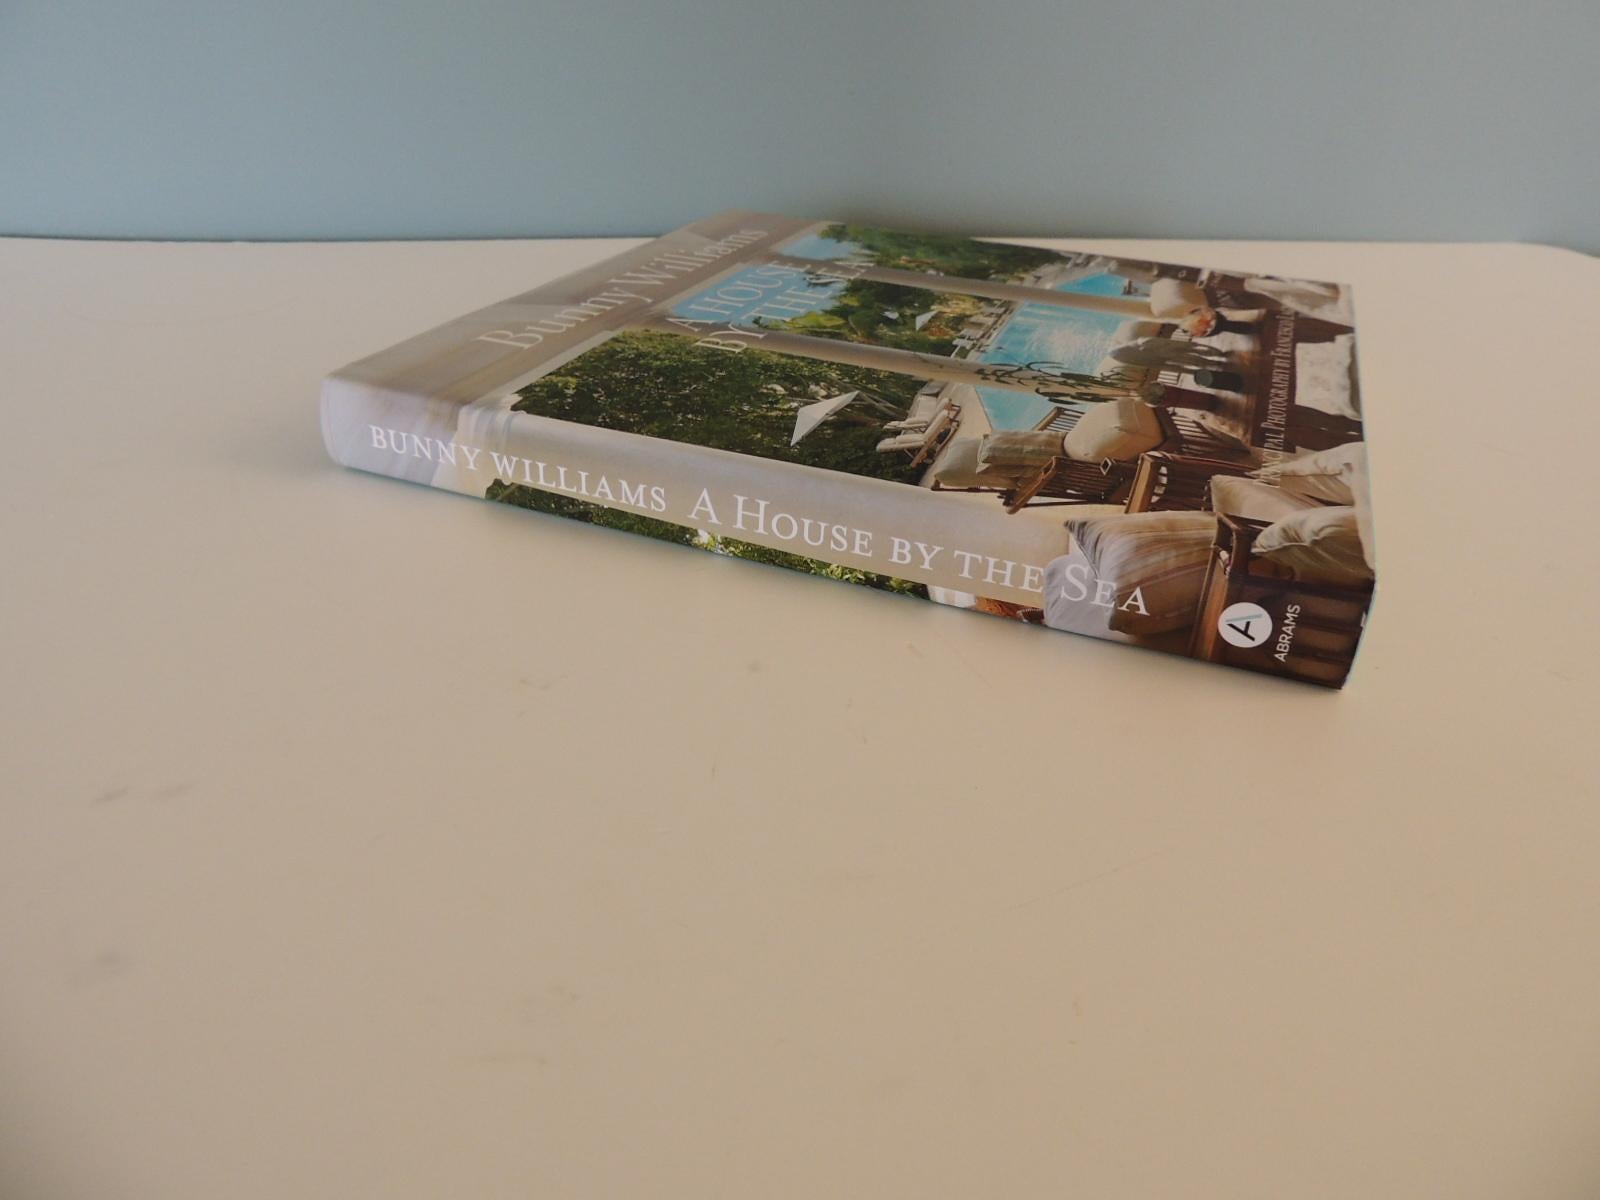 Paper House by the Sea Hardcover Book by Bunny Williams For Sale